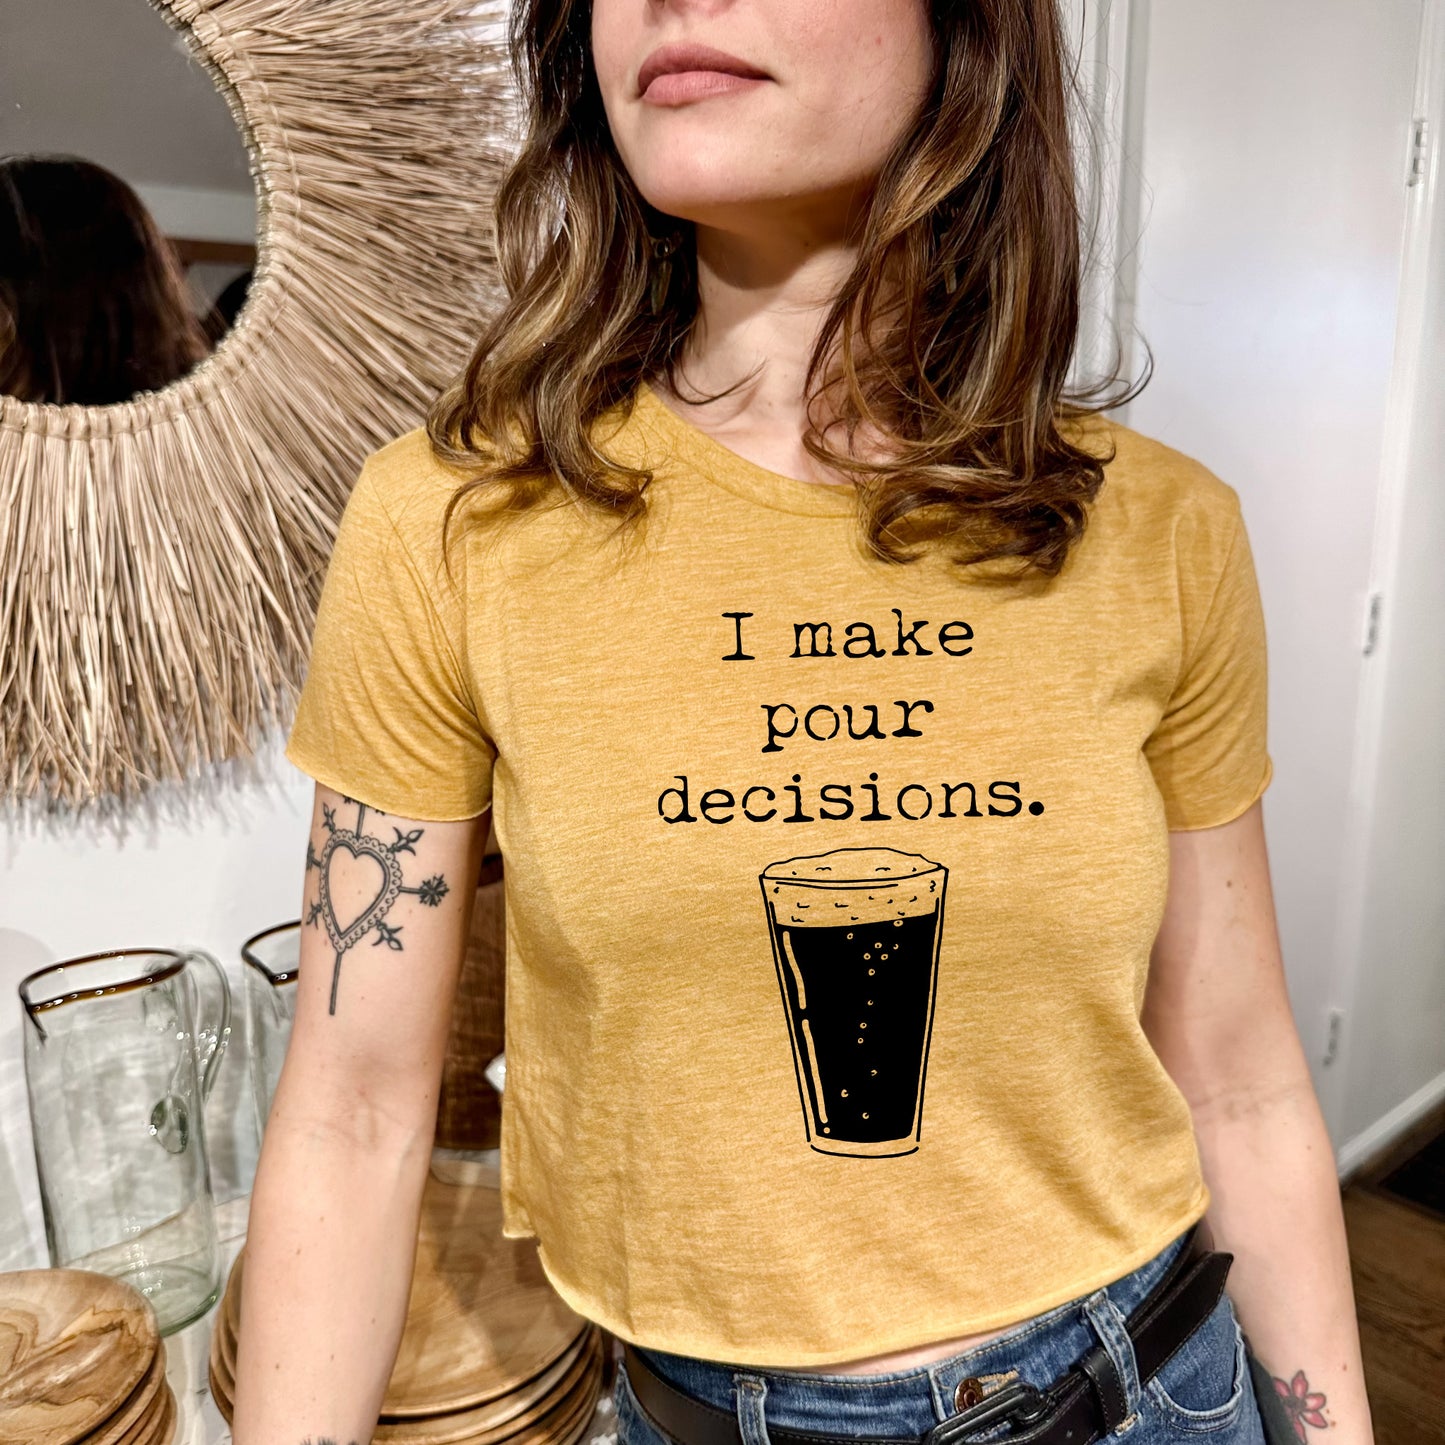 I Make Pour Decisions - Women's Crop Tee - Heather Gray or Gold